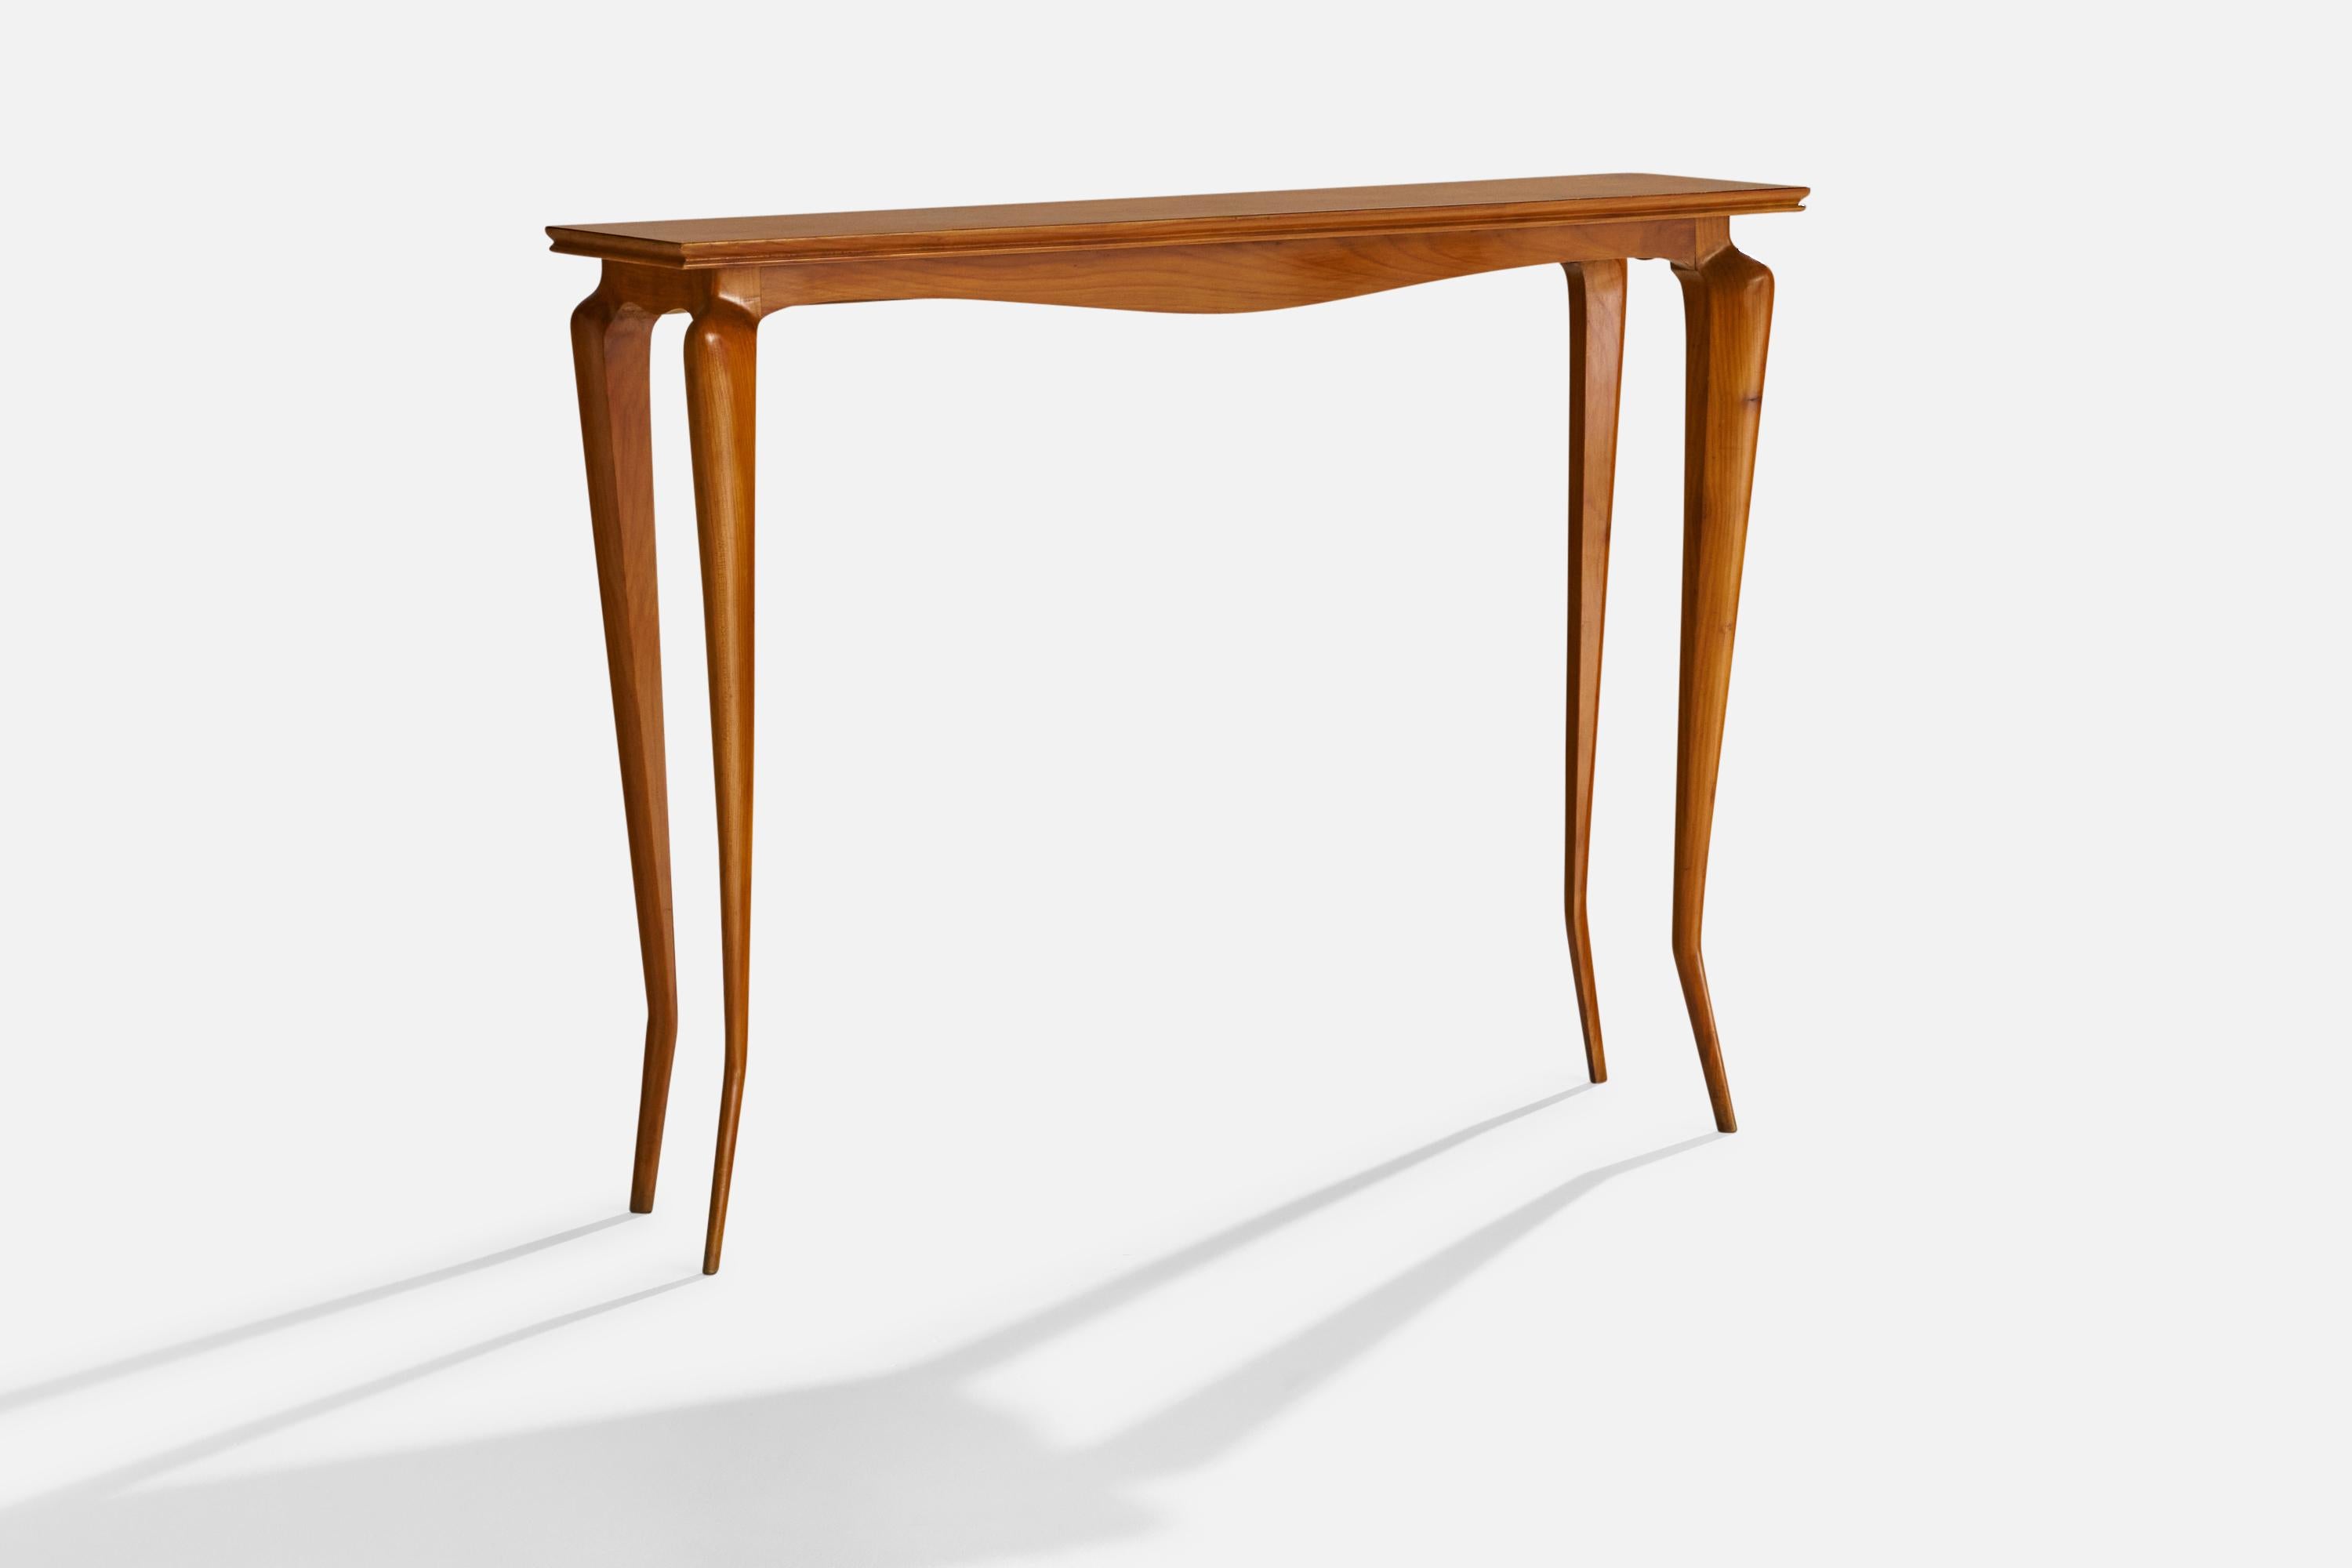 A wood console table designed and produced in Italy, c. 1960s.